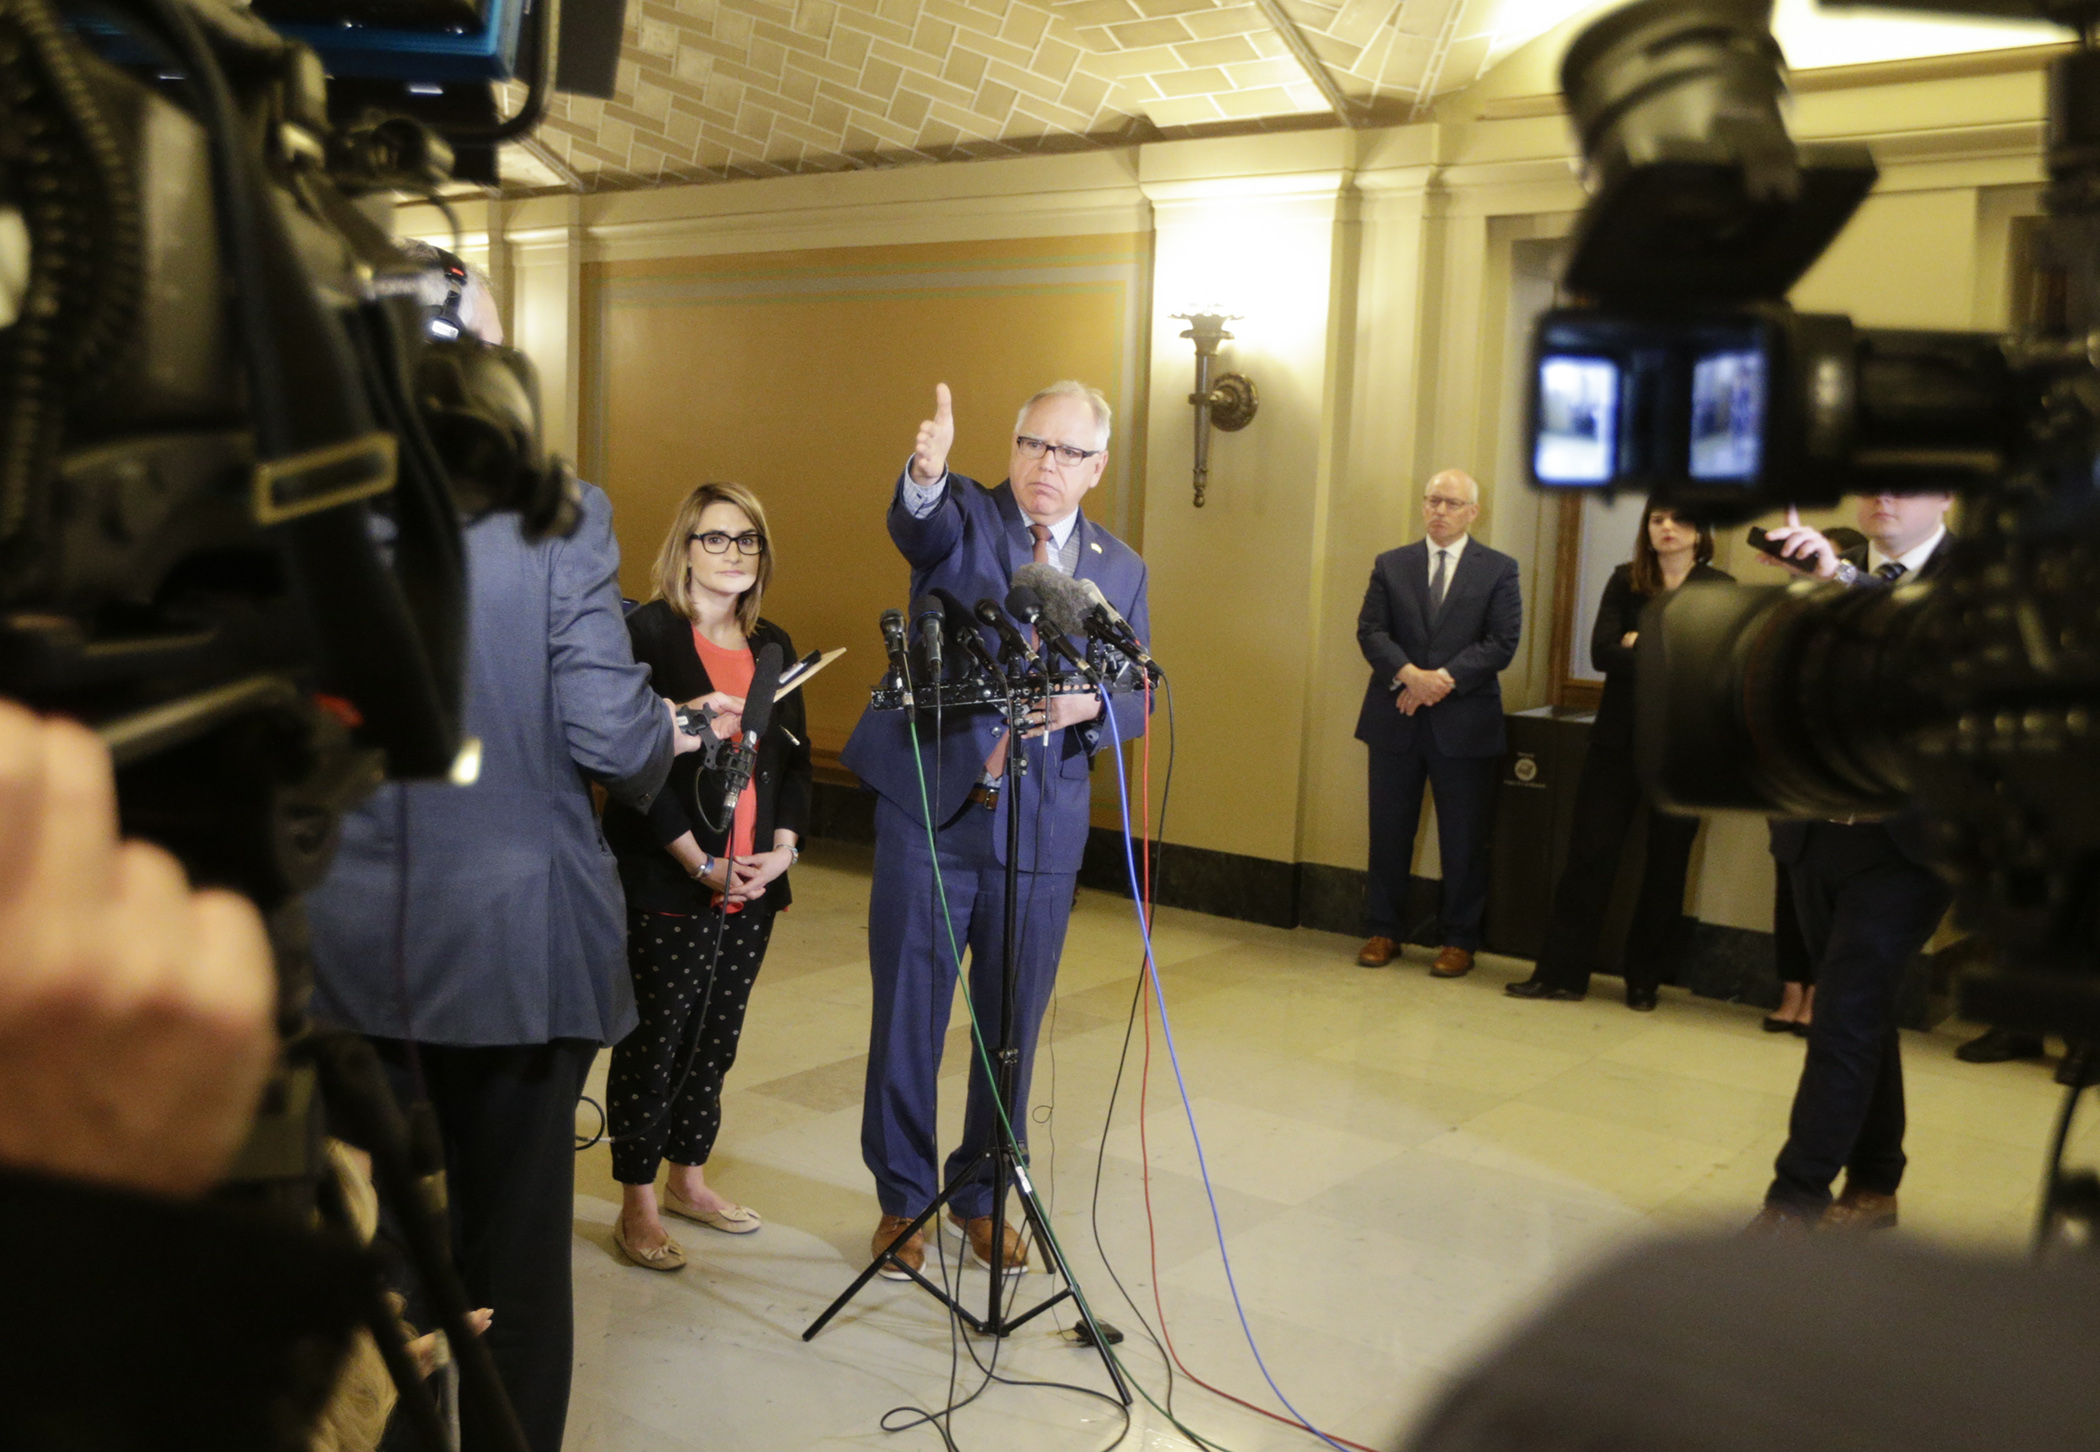 Gov. Tim Walz said a morning meeting with House Speaker Melissa Hortman and Senate Majority Leader Paul Gazelka was “positive,” as they try to work out budget differences with two weeks to go in the legislative session. Photo by Paul Battaglia